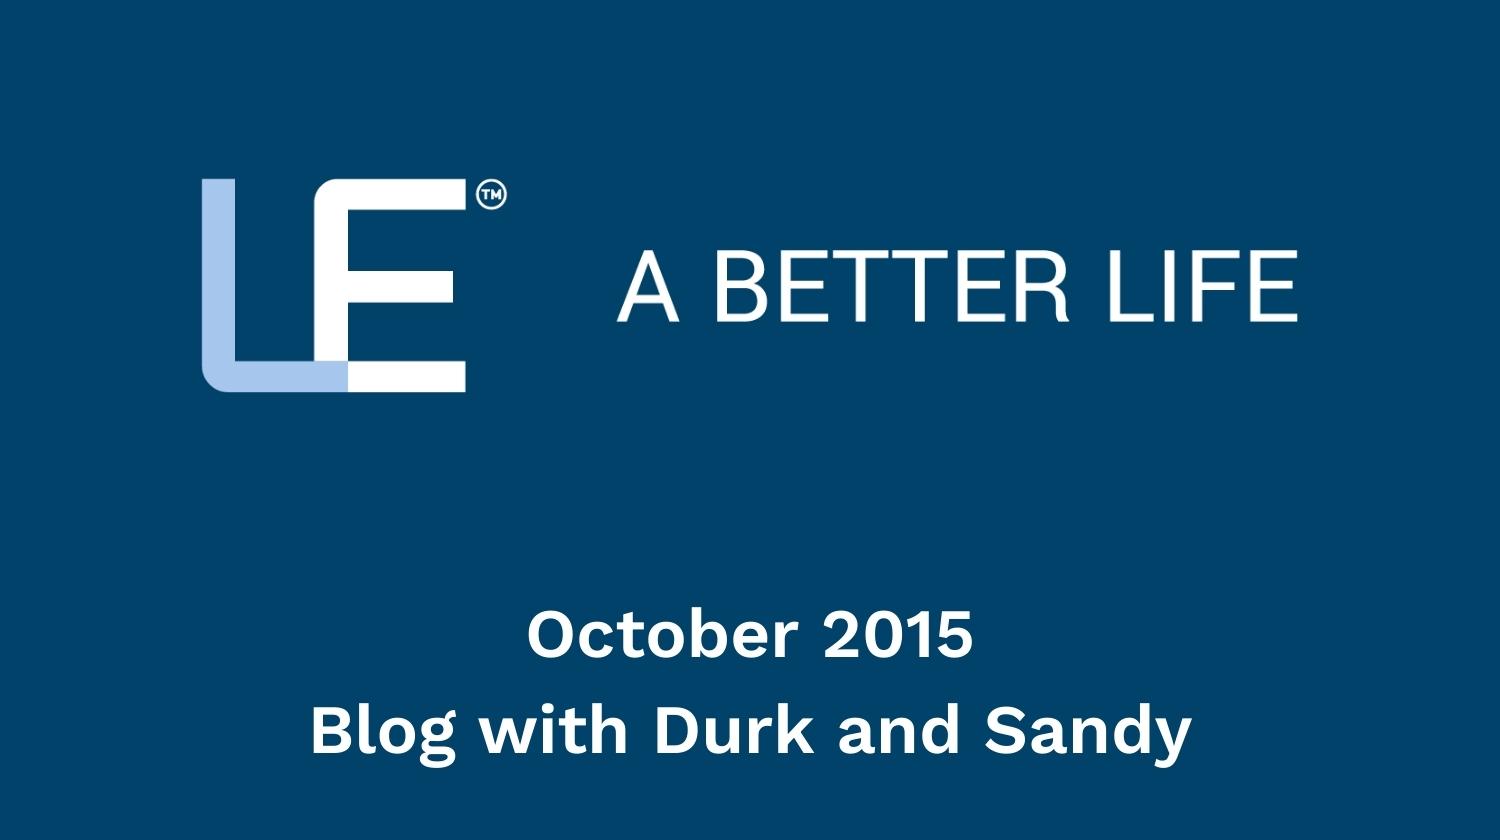 October 2015 Blog with Durk and Sandy